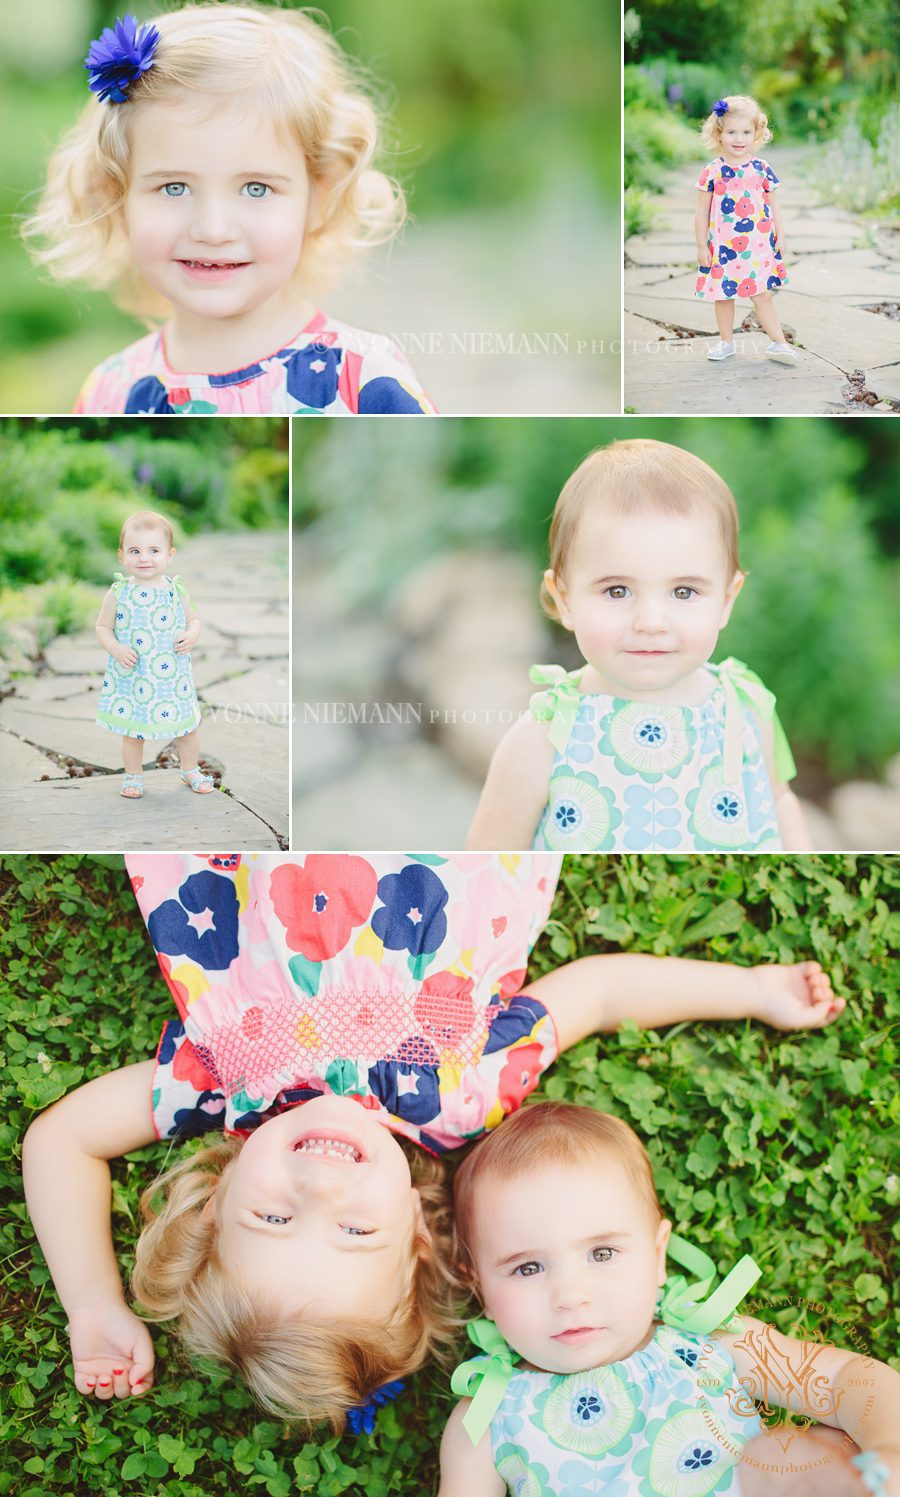 Fun sibling sister photos taken in a park in St. Louis by Yvonne Niemann Photography.